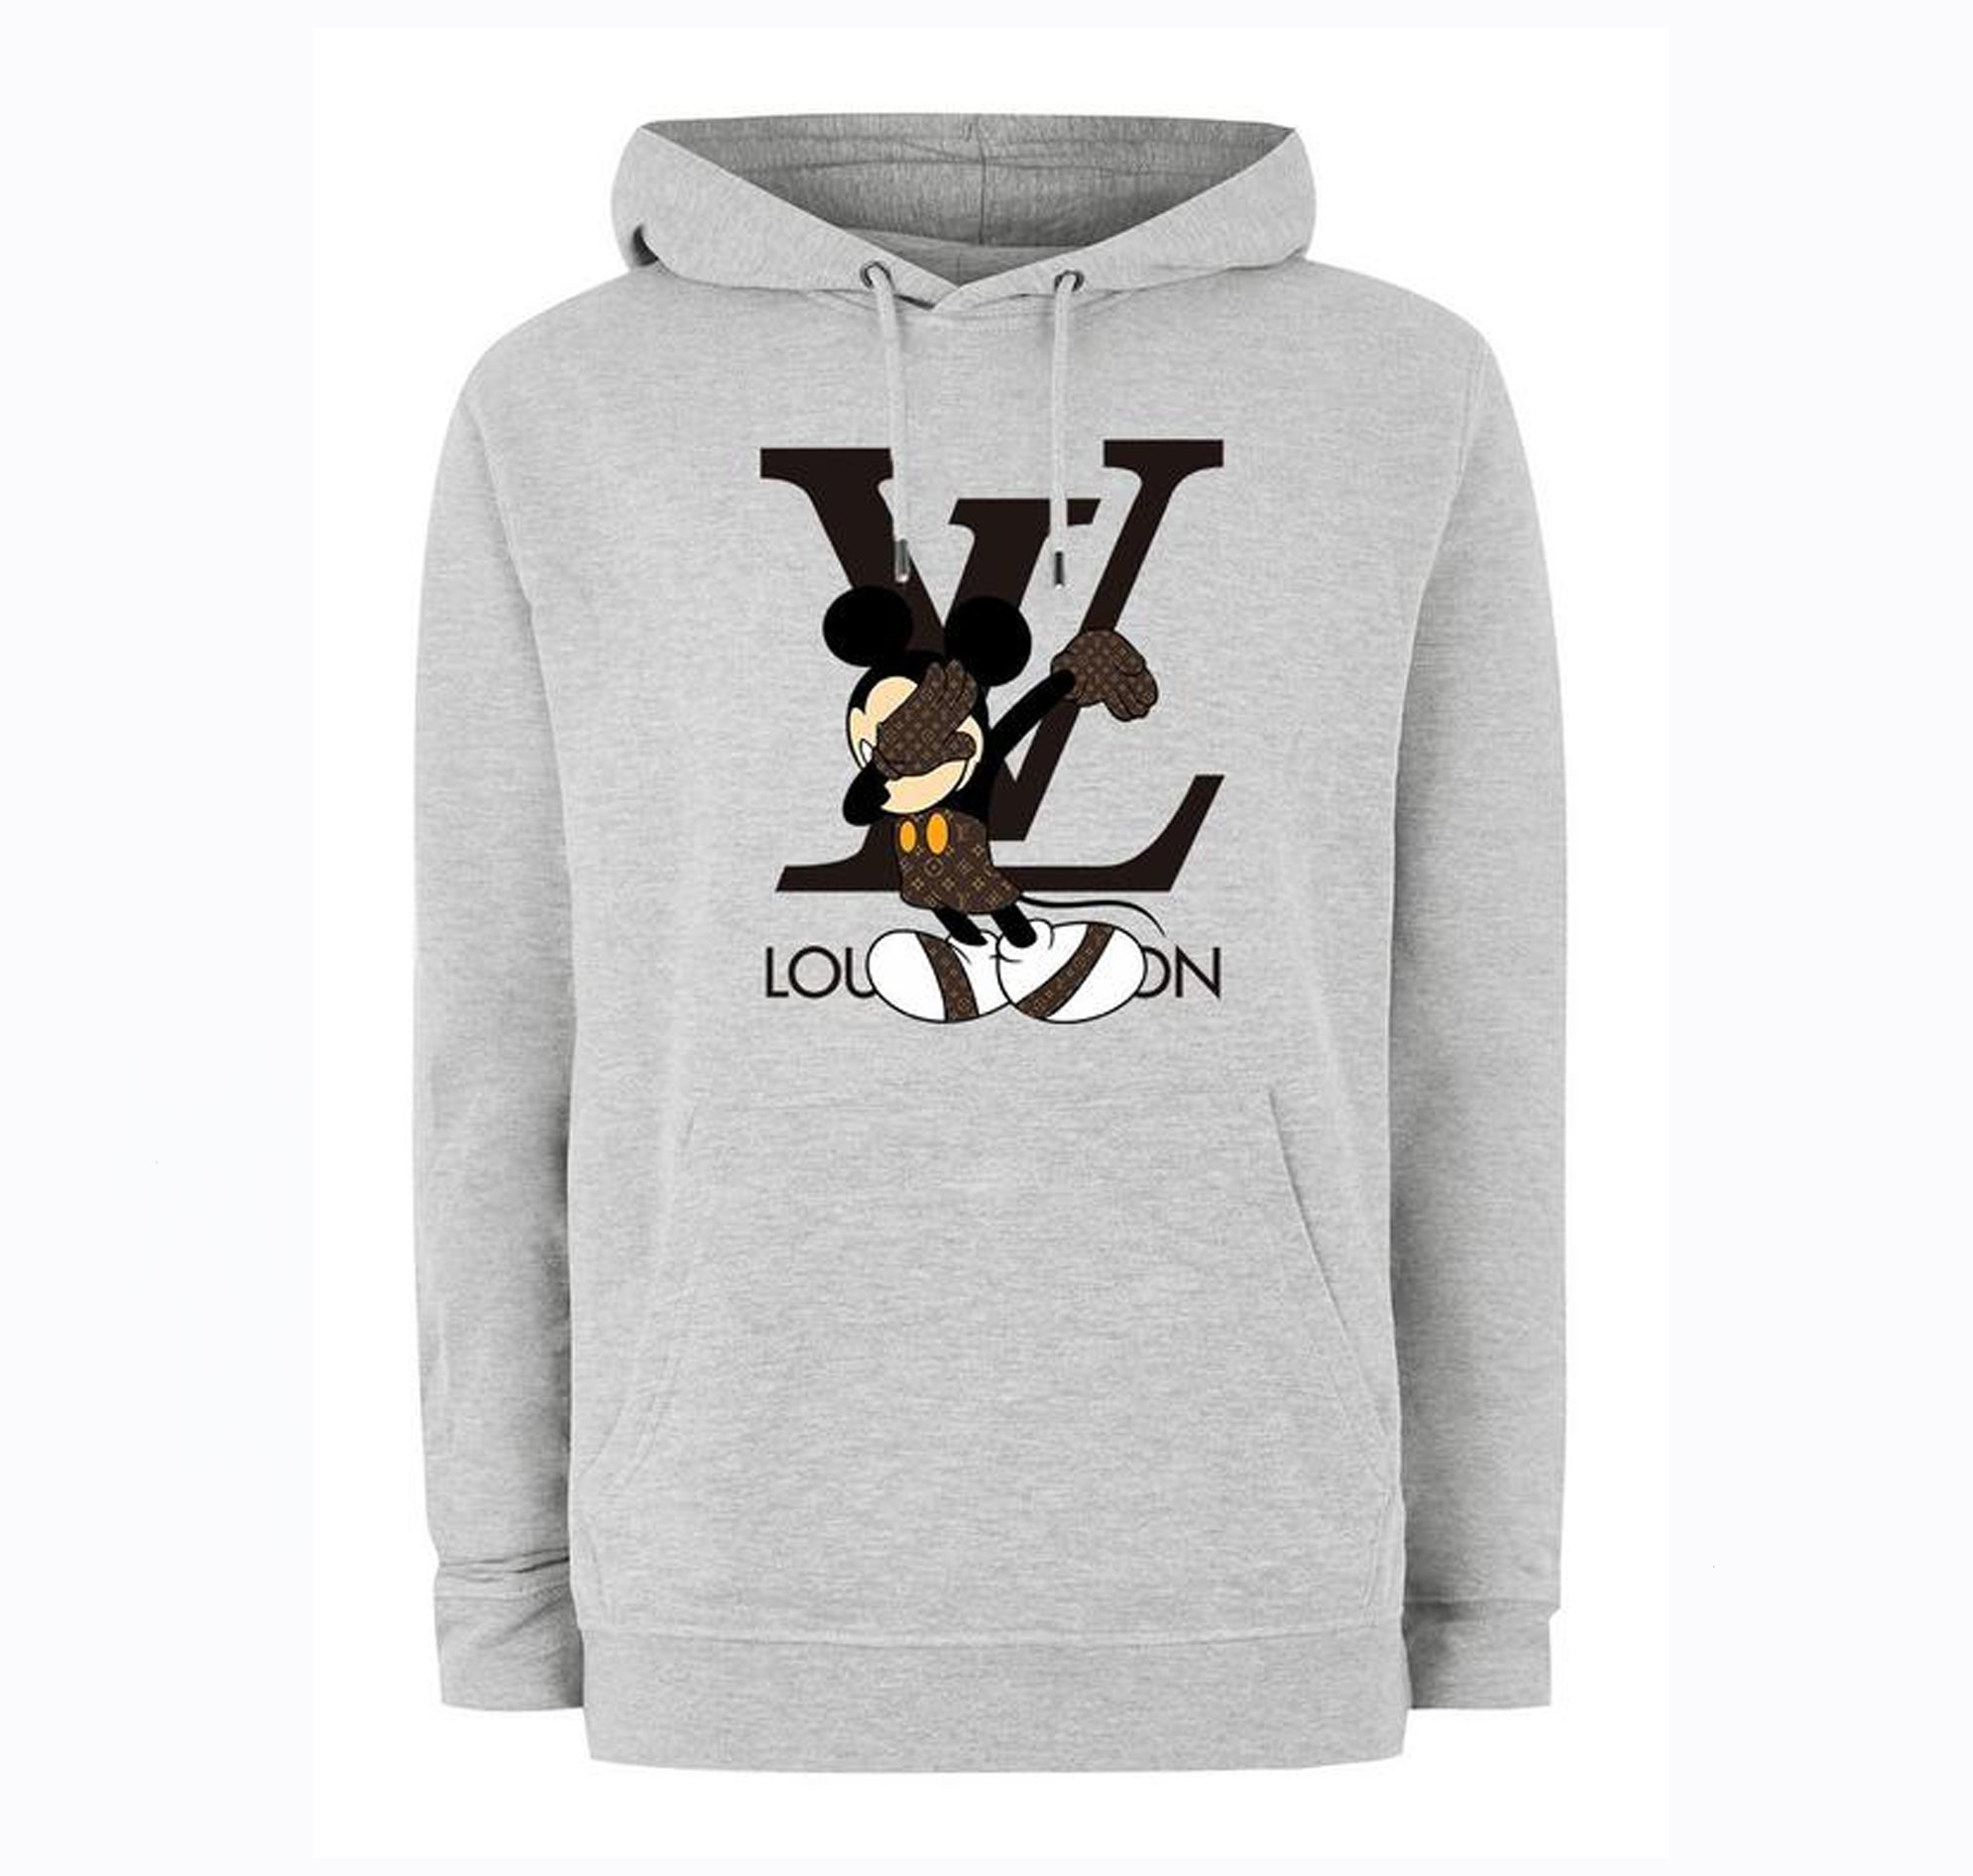 Mickey Mouse Louis Vuitton I'm a simple woman shirt, hoodie, sweater